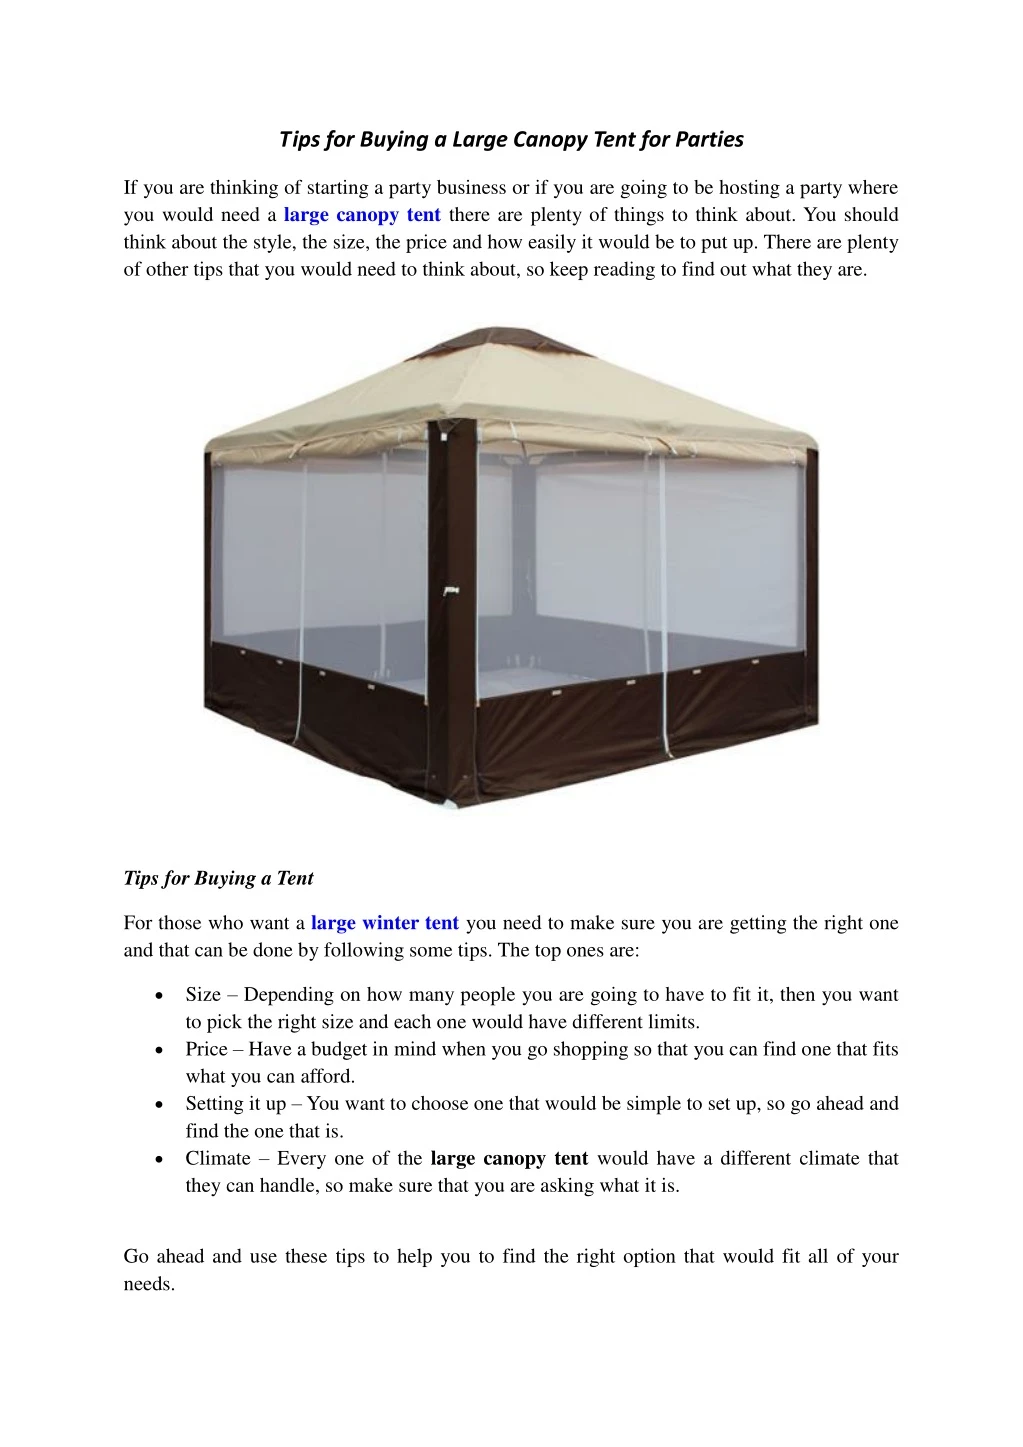 tips for buying a large canopy tent for parties